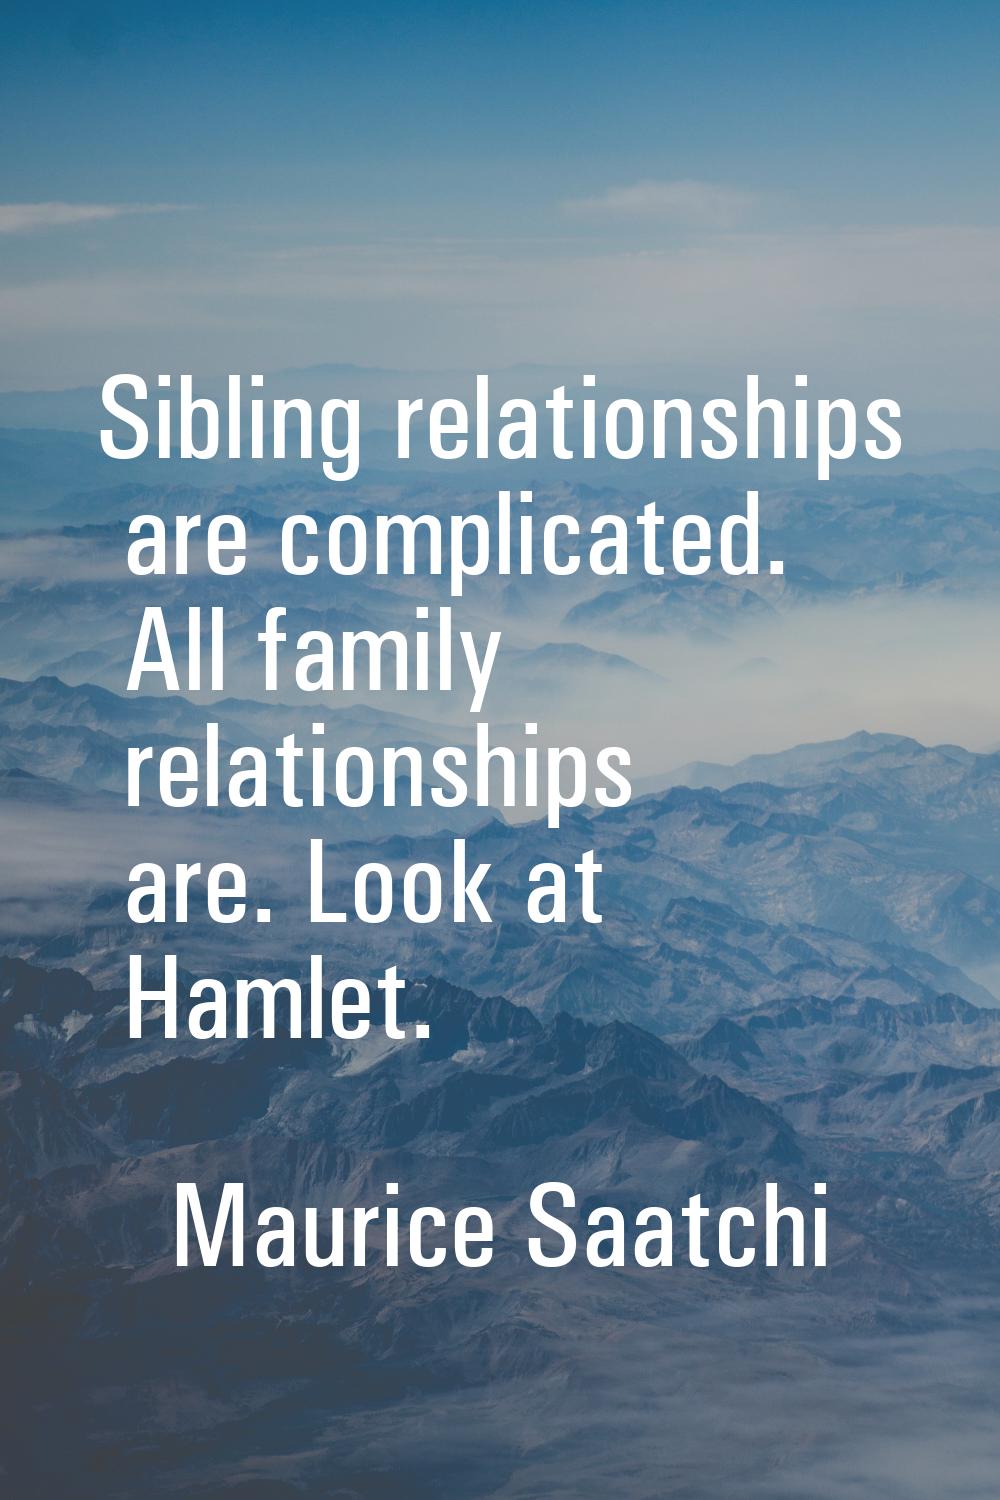 Sibling relationships are complicated. All family relationships are. Look at Hamlet.